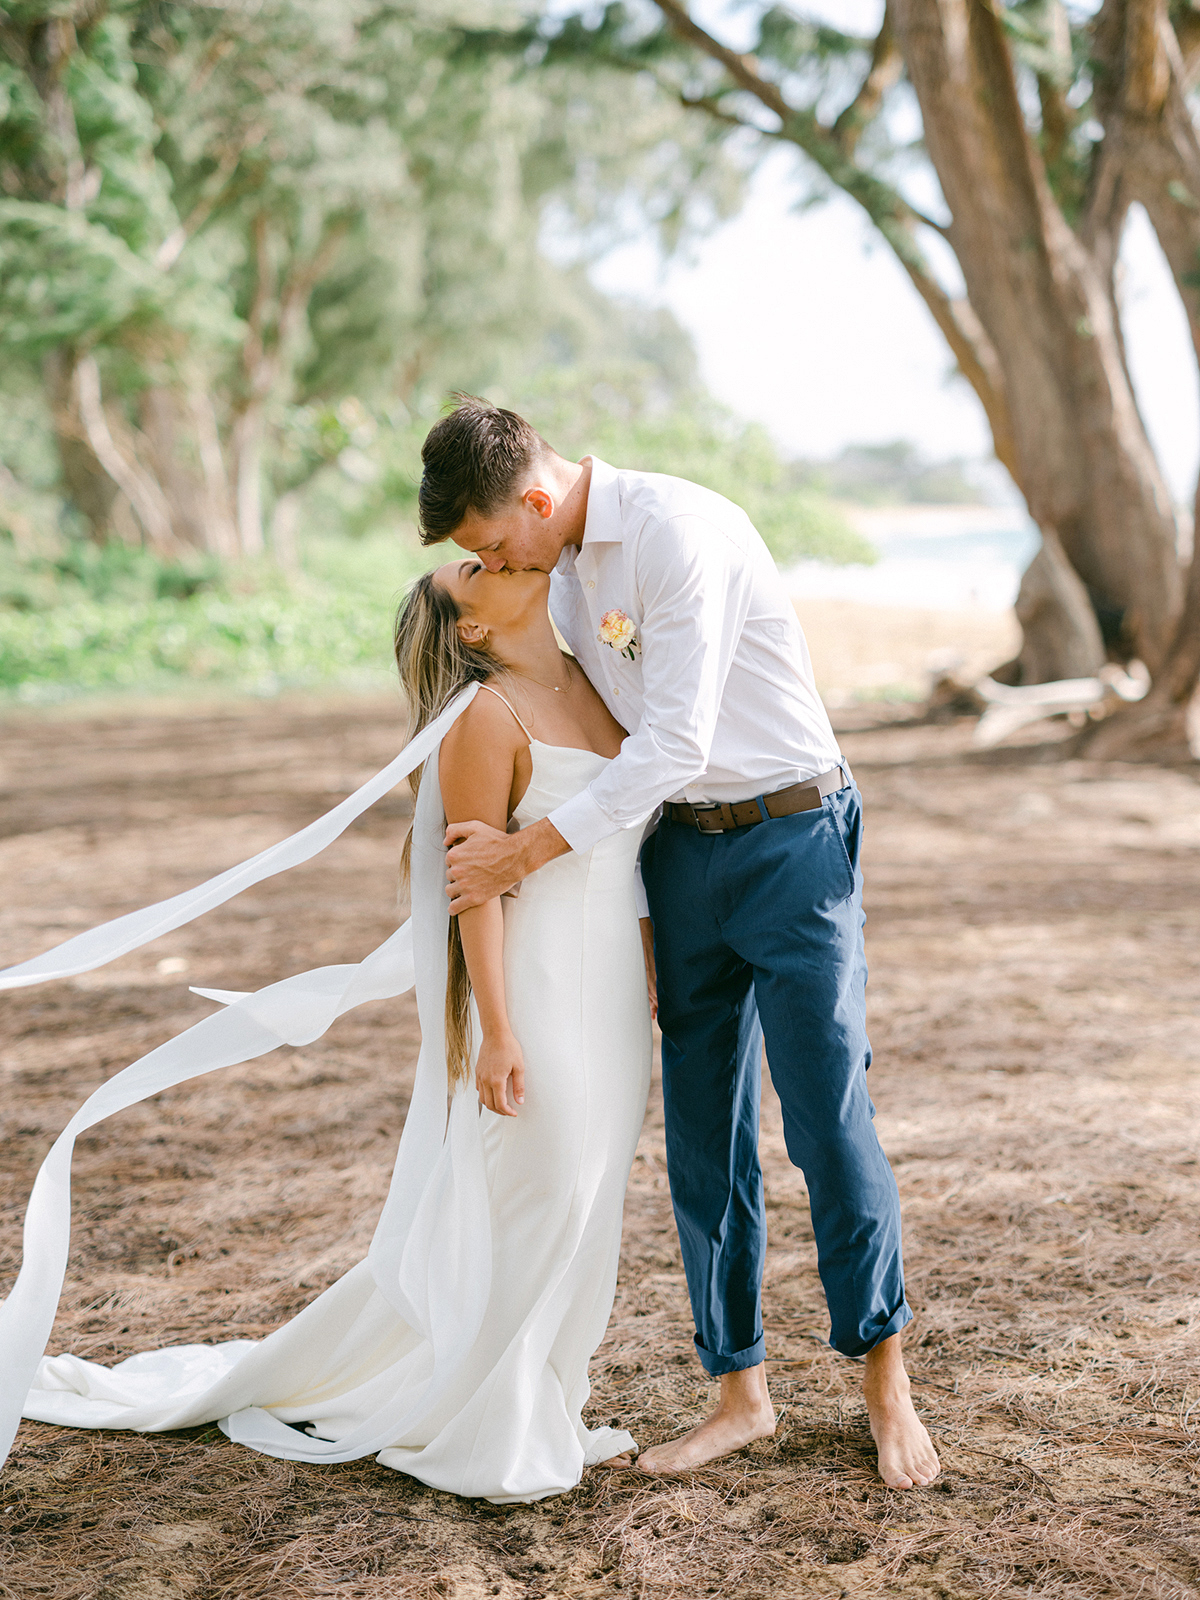 Playful and colorful Hawaiian elopement by Laura Ivanova Photography